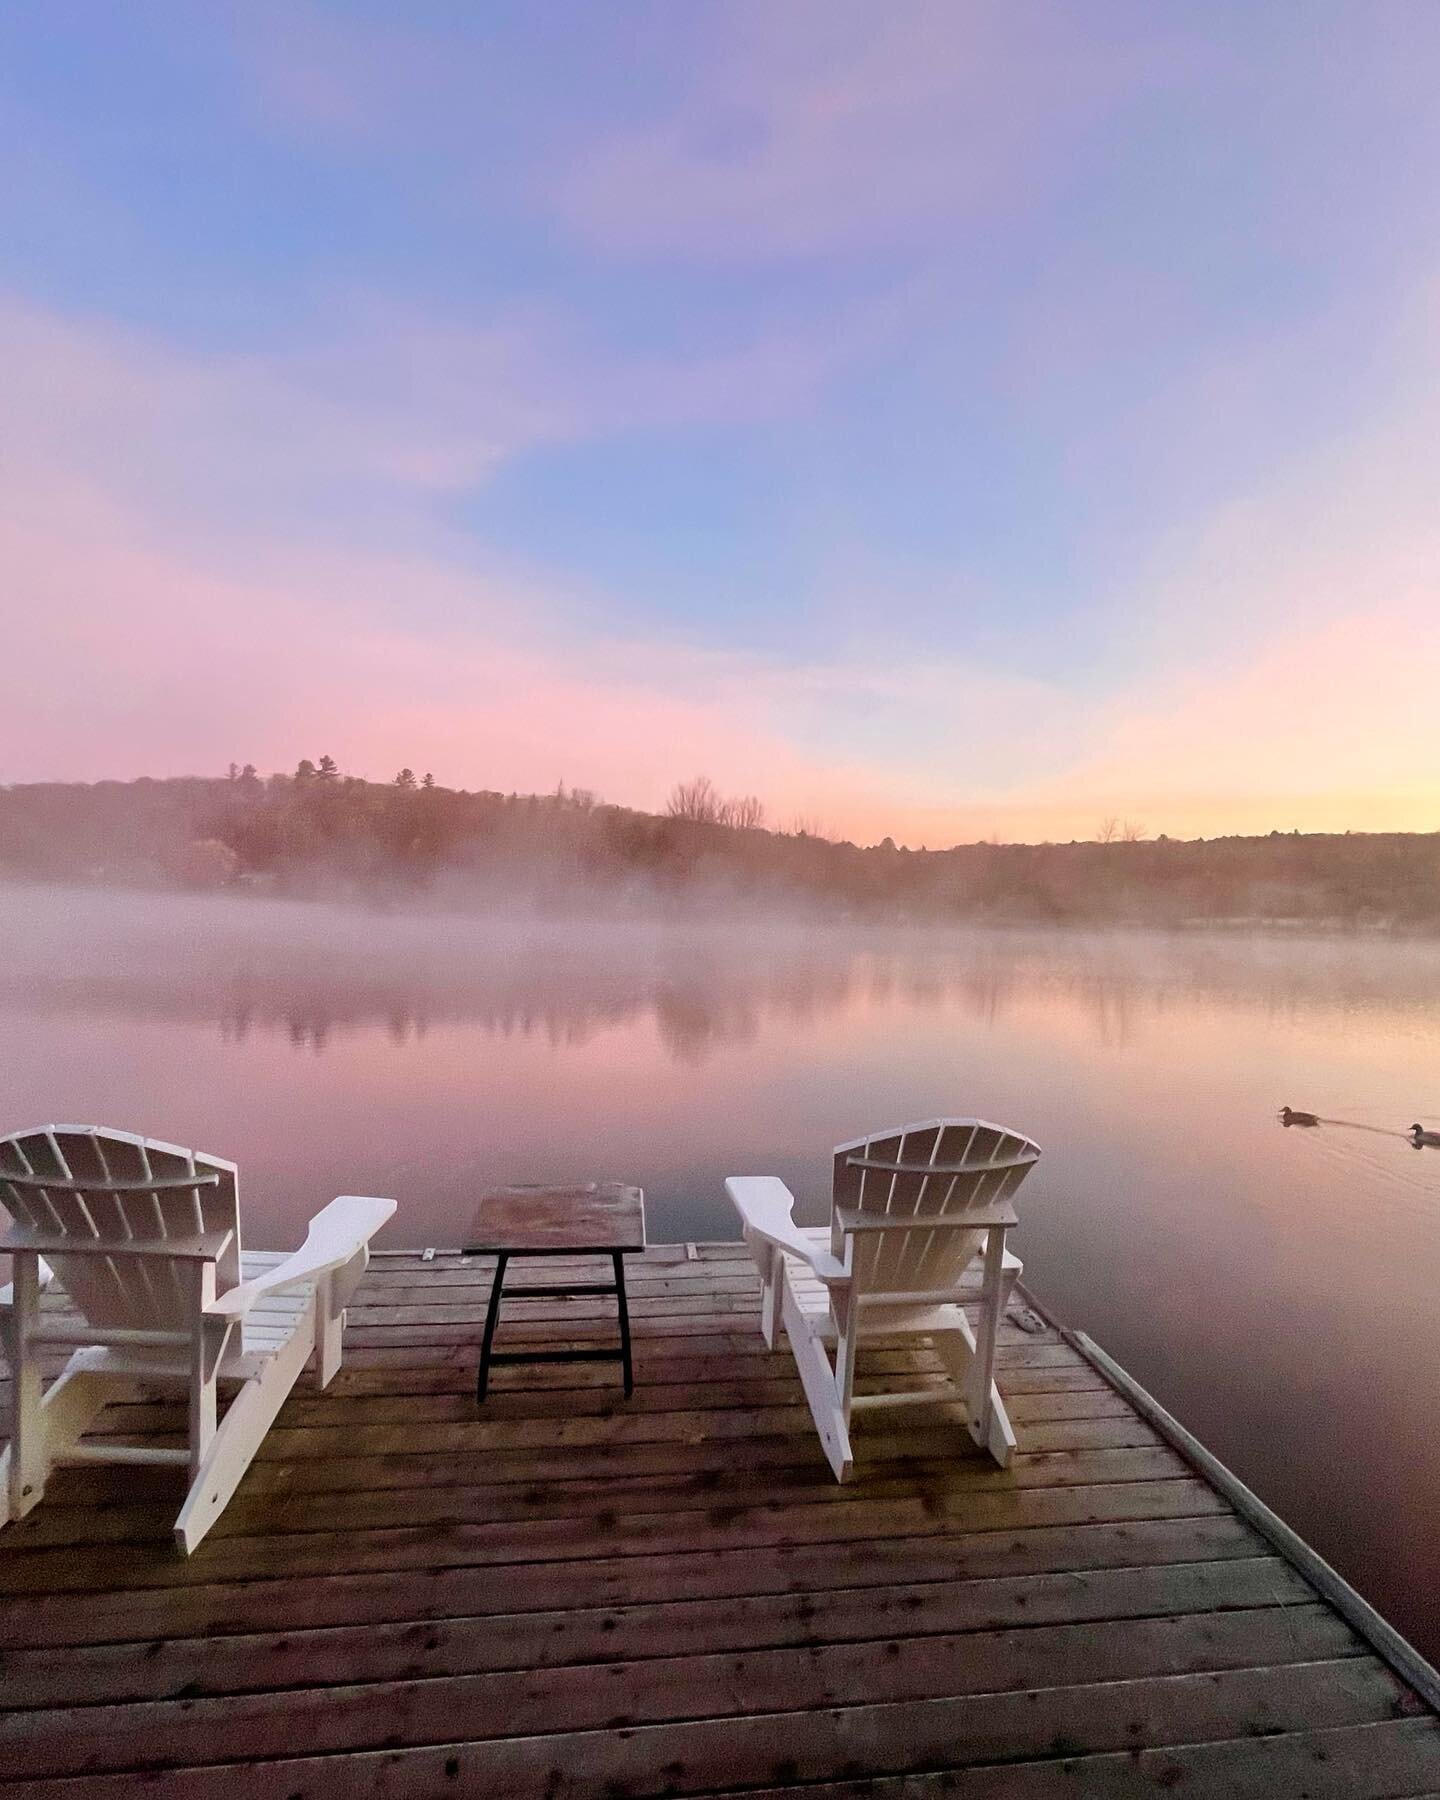 Misty mornings&hellip; those cold, crisp mornings before the lake freezes for the winter. 

#thewatersedgetreehouse #treehouse #canadiantreehouse
#cabinlife #cabininthewoods #muskokacottage #excapethecity #muskoka #muskokaliving #cabindiaries #myhgtv